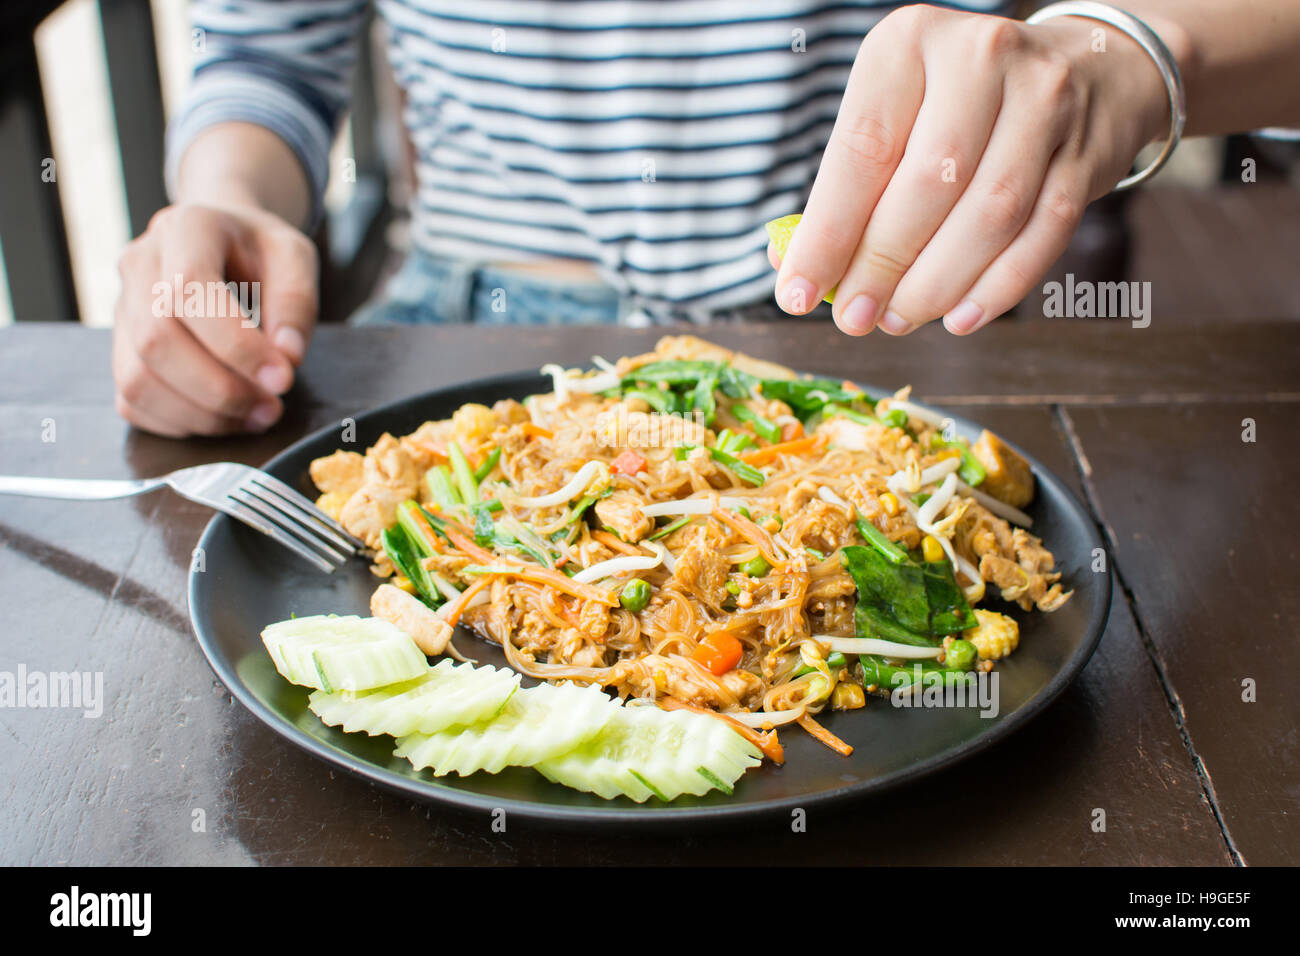 Female hand squeezing lime on Pad Thai in restaurant Stock Photo